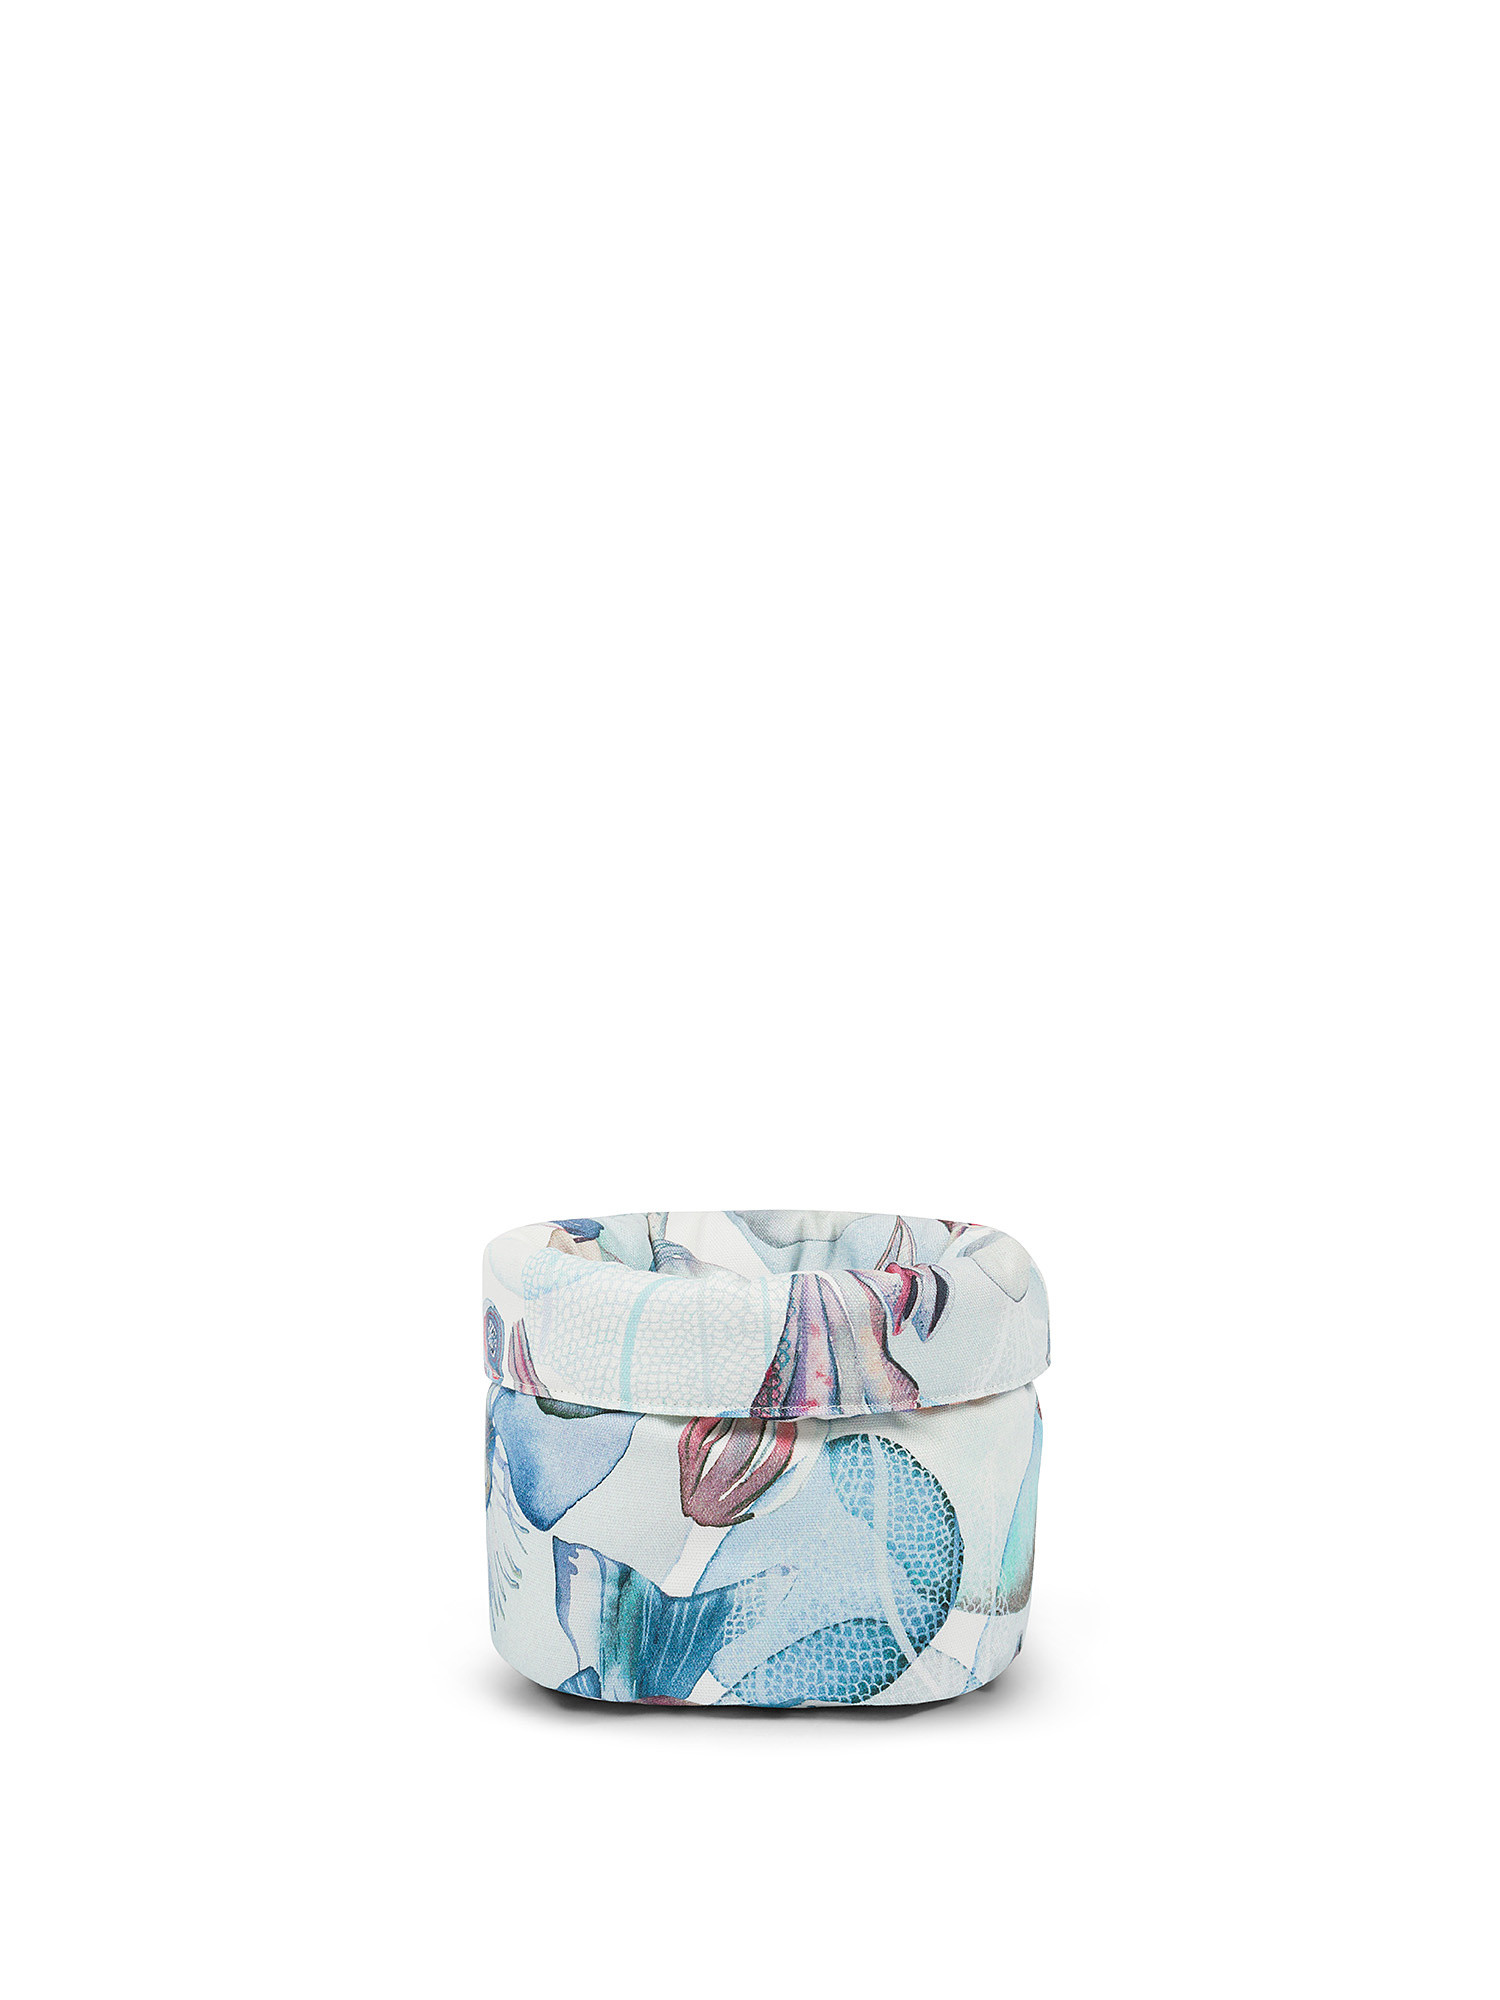 Seabed print basket in pure cotton panama., Multicolor, large image number 0